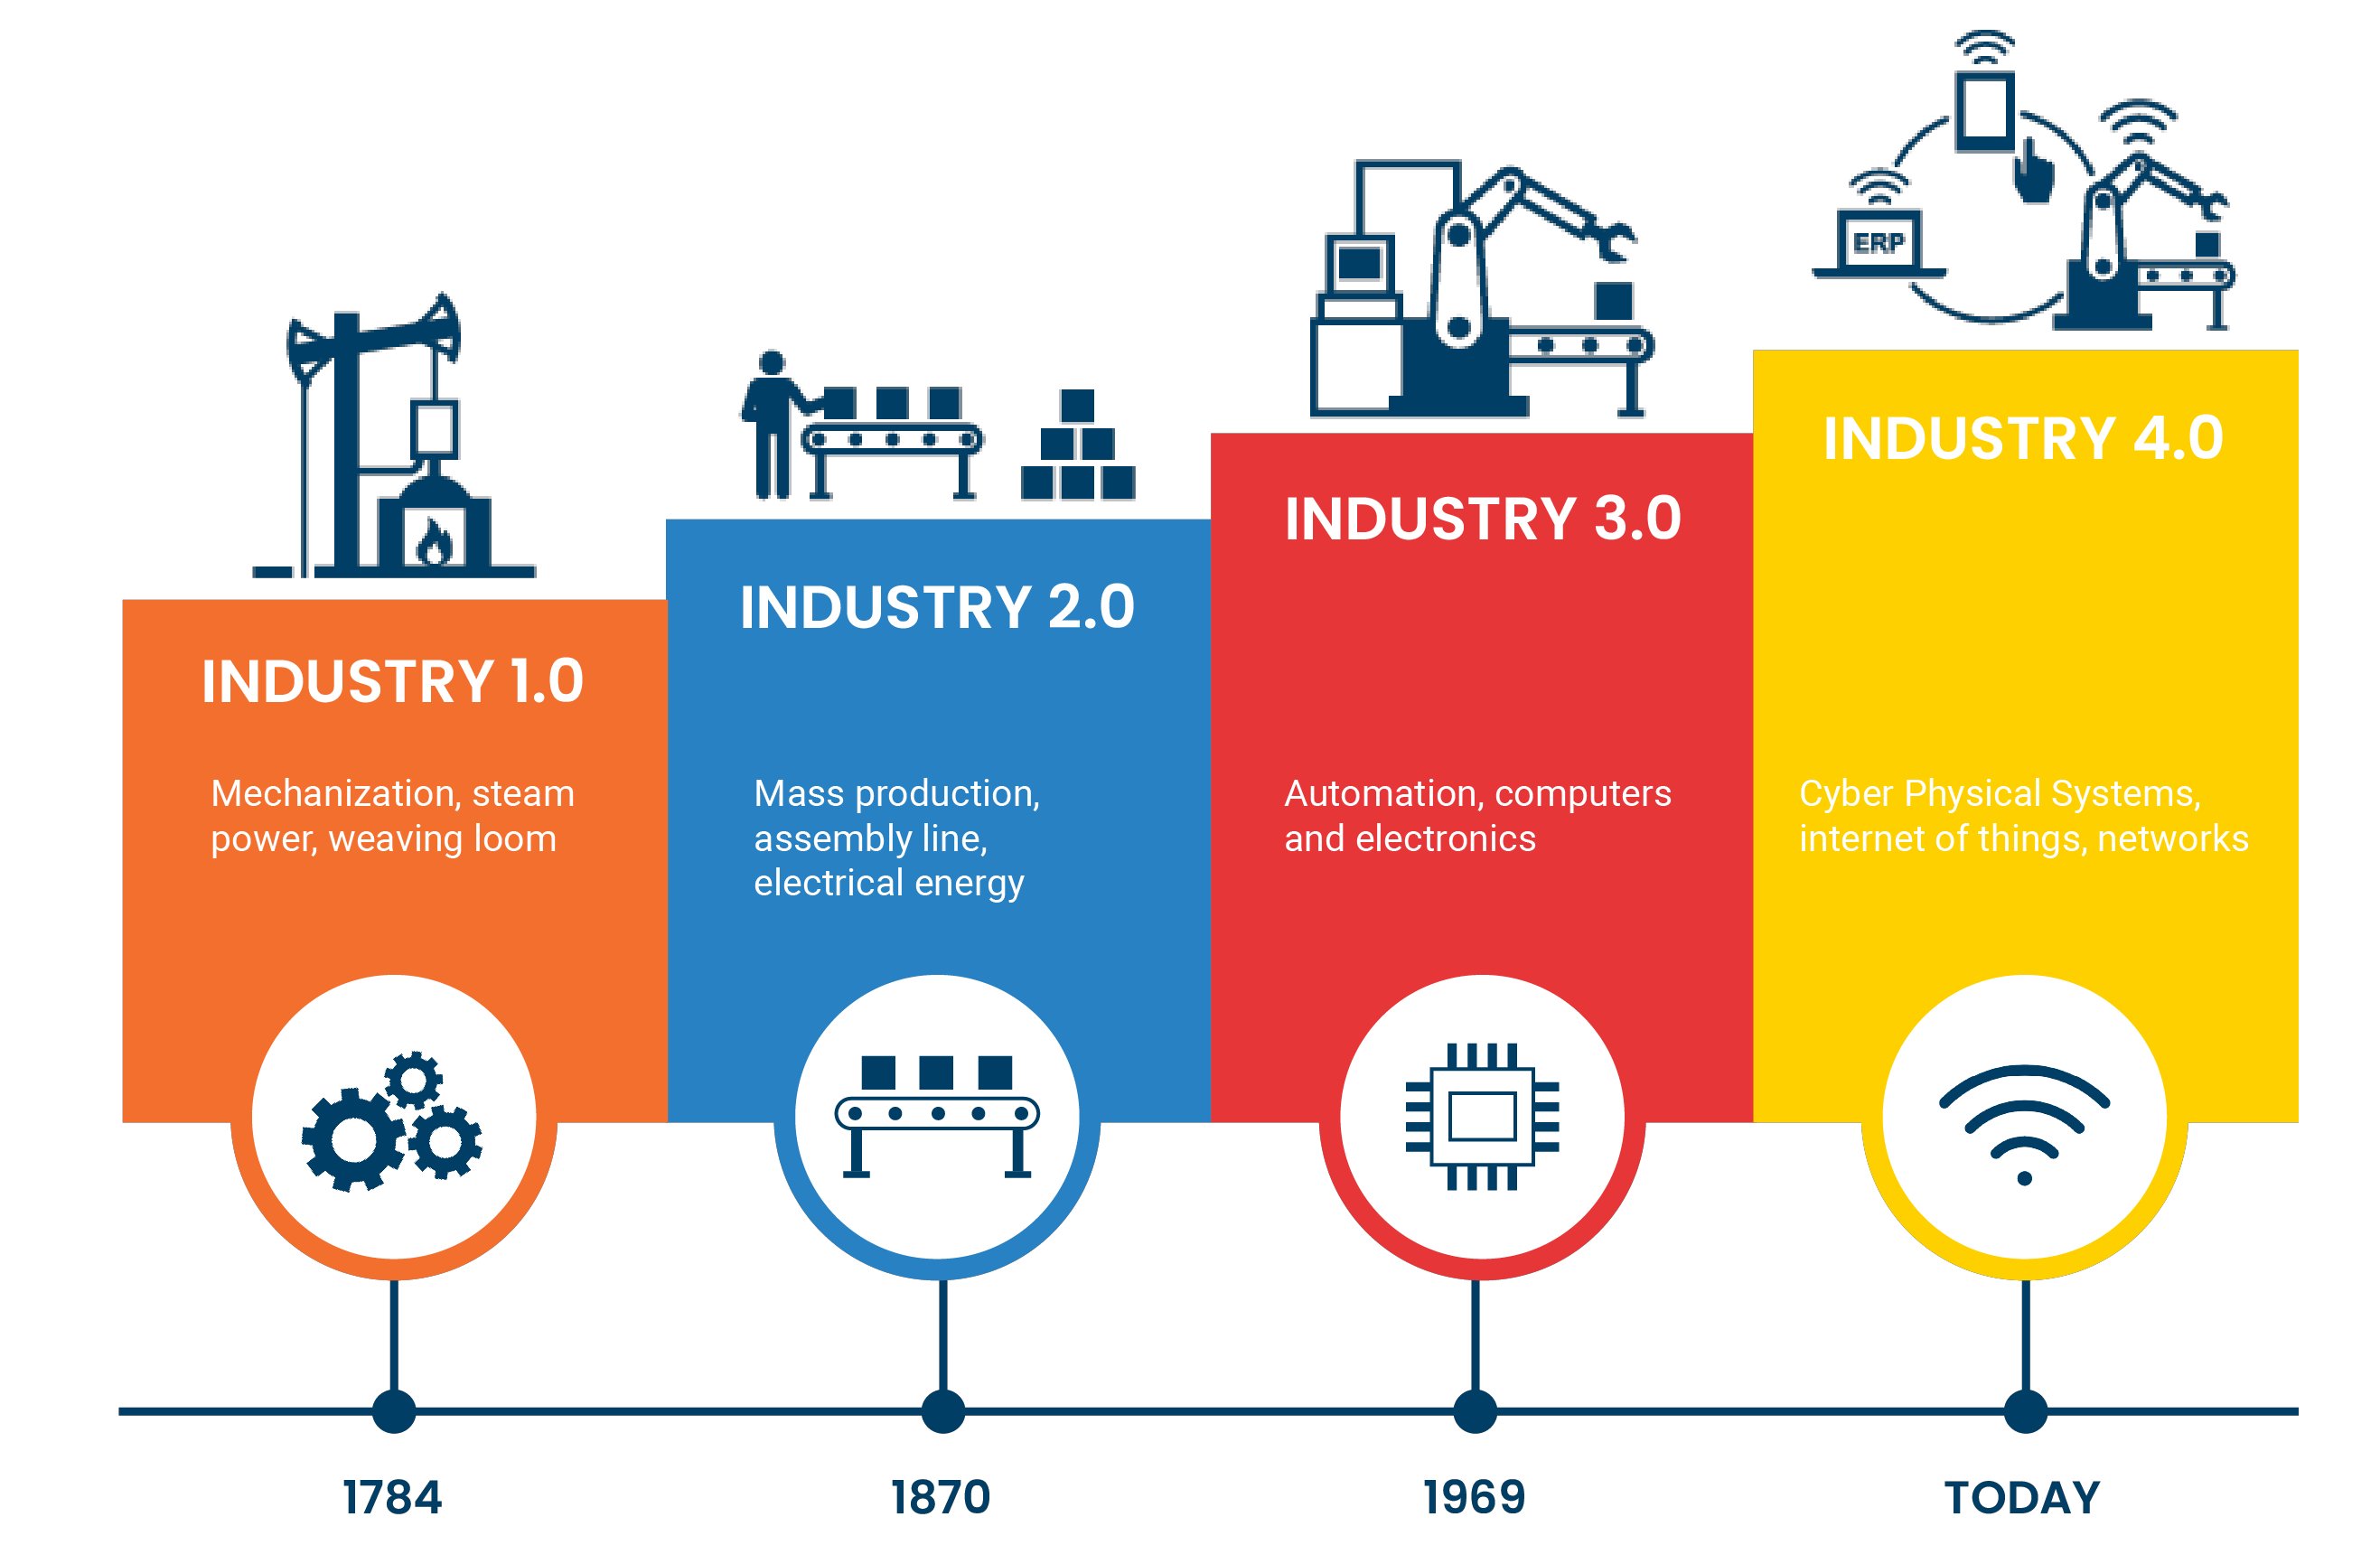 industry 1 to industry 4